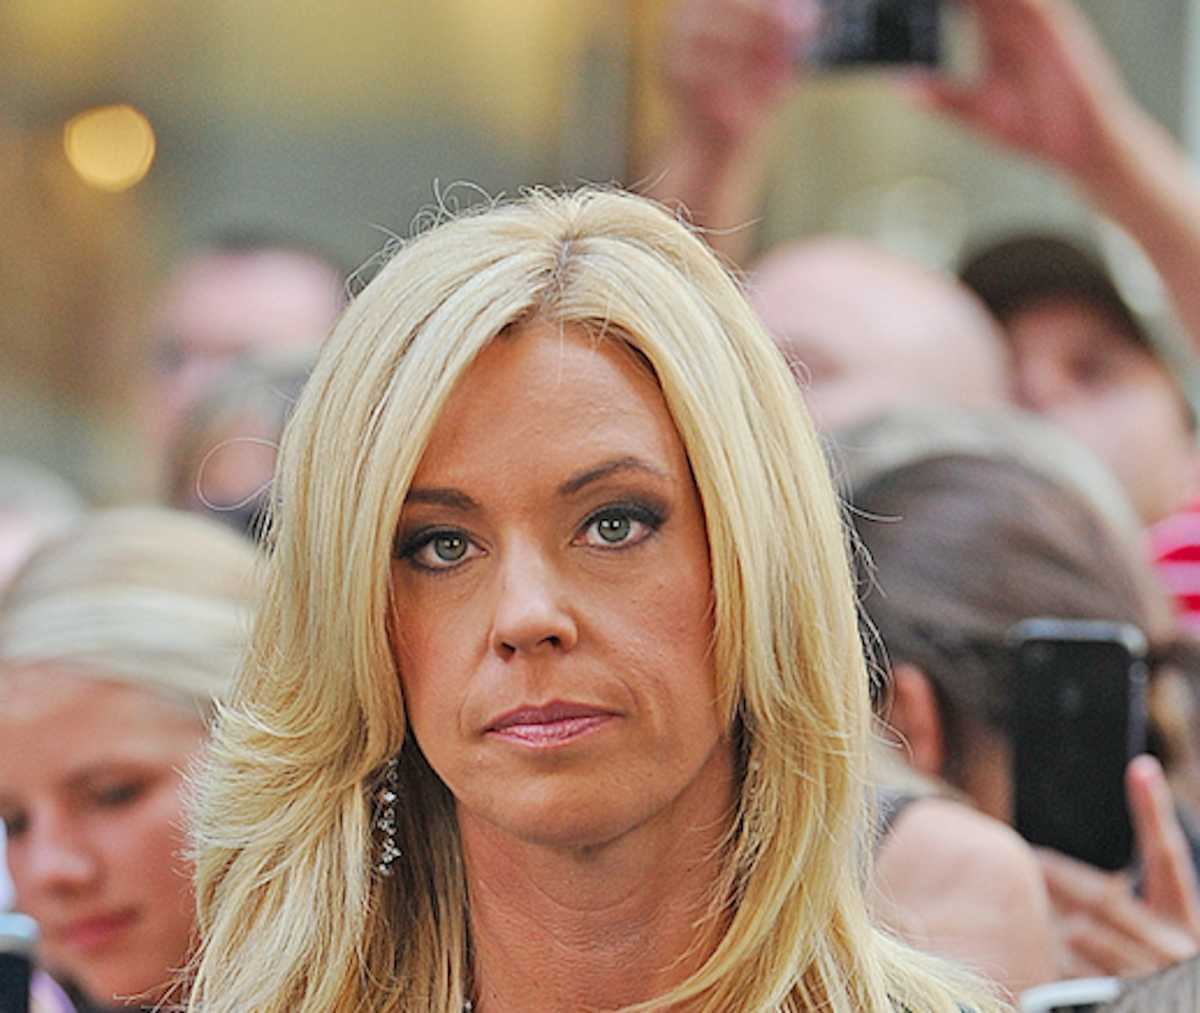 Kate Gosselin's 'Very Spiteful' Nature Could Prevent Her From